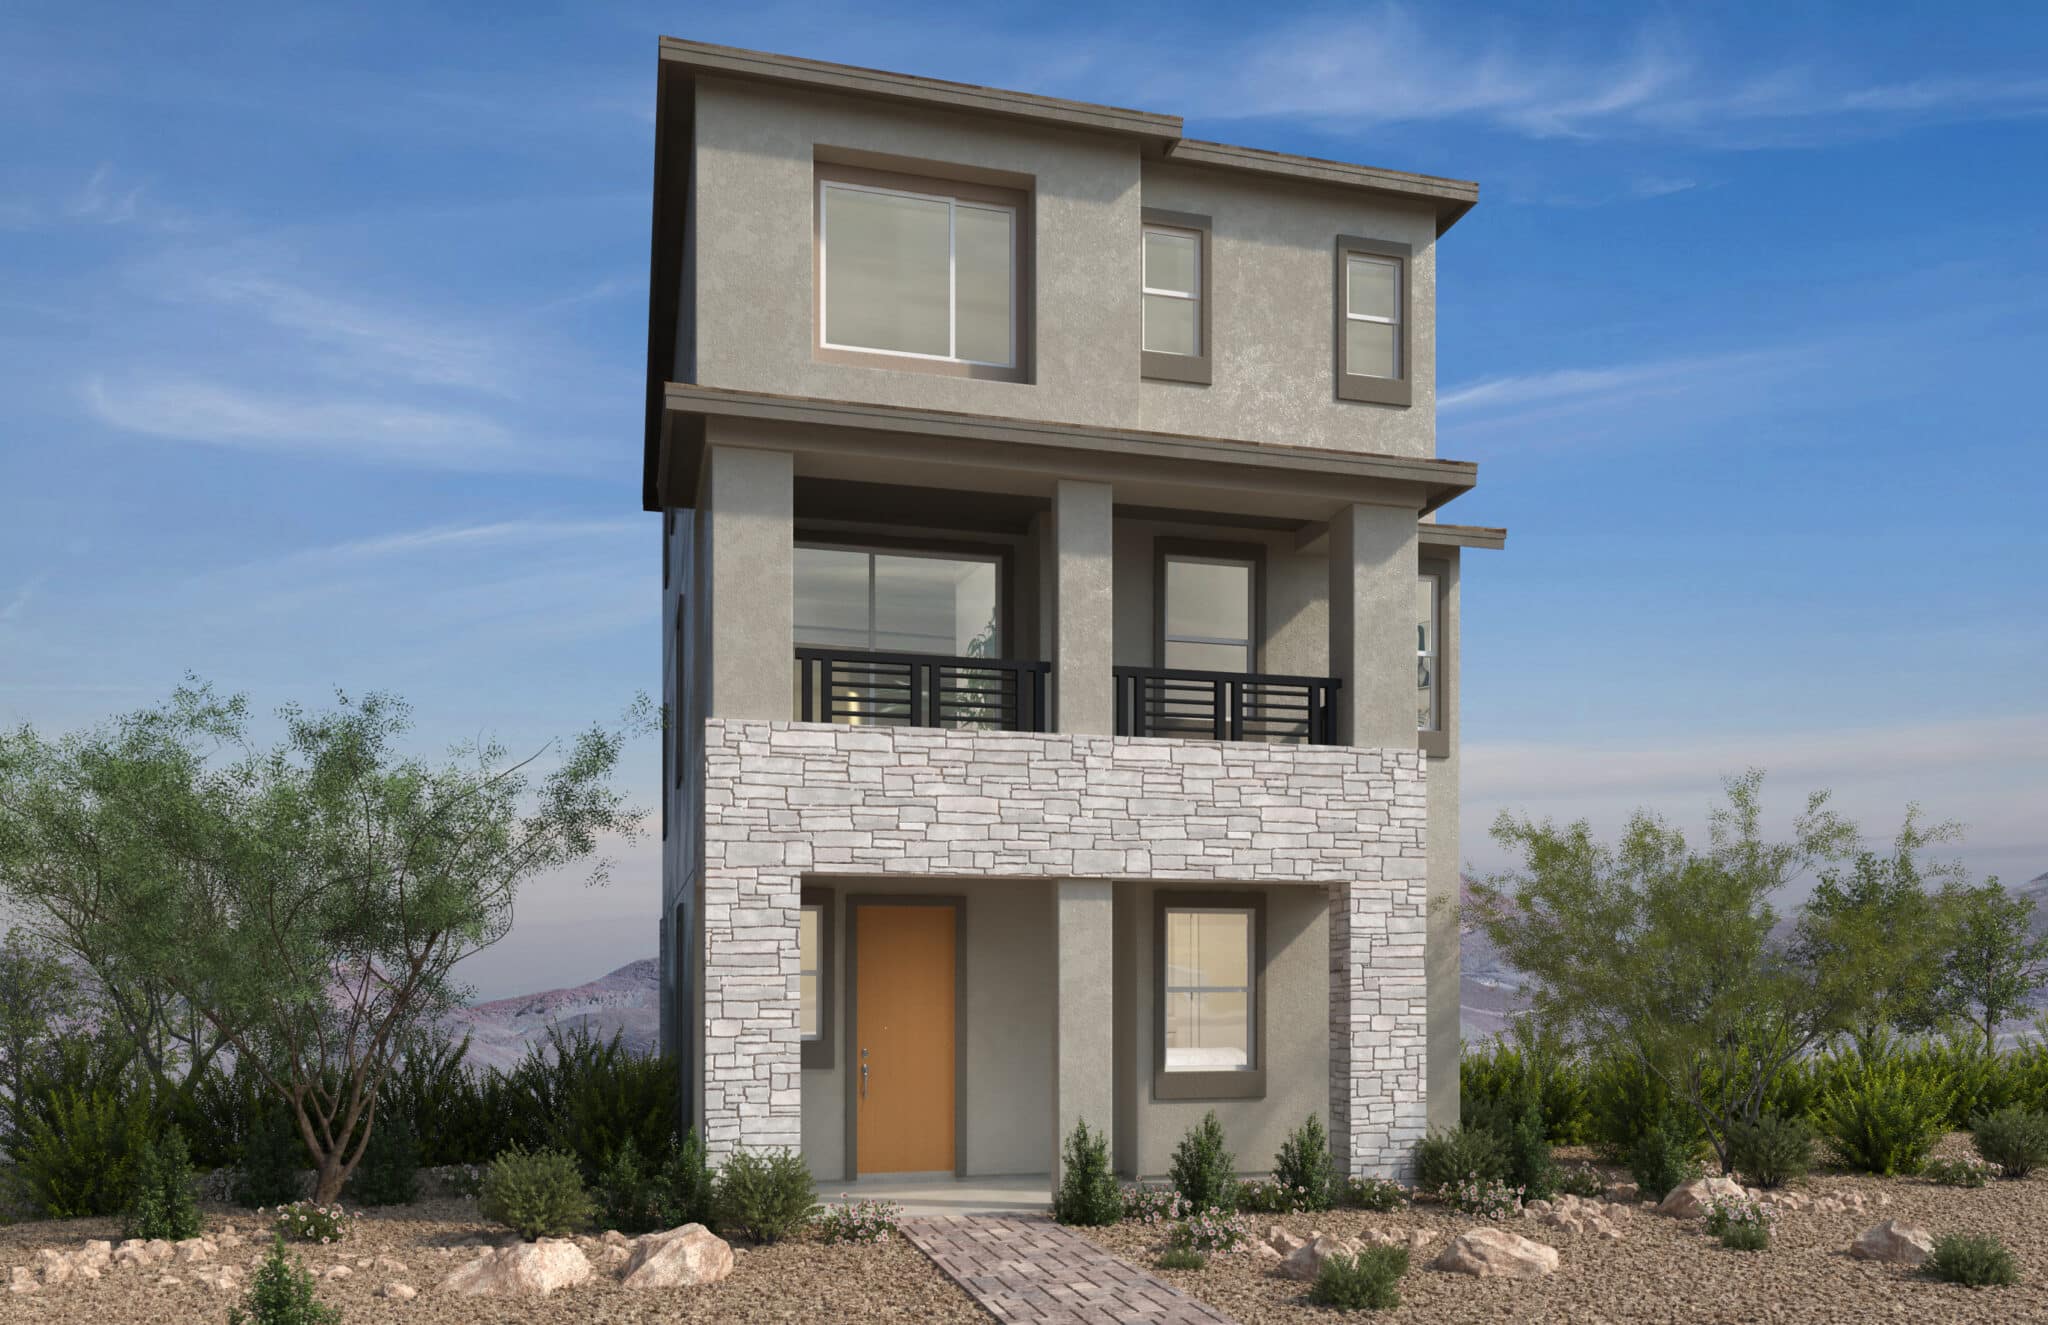 Elevation B of Plan 2226 at Quail Cove by KB Home